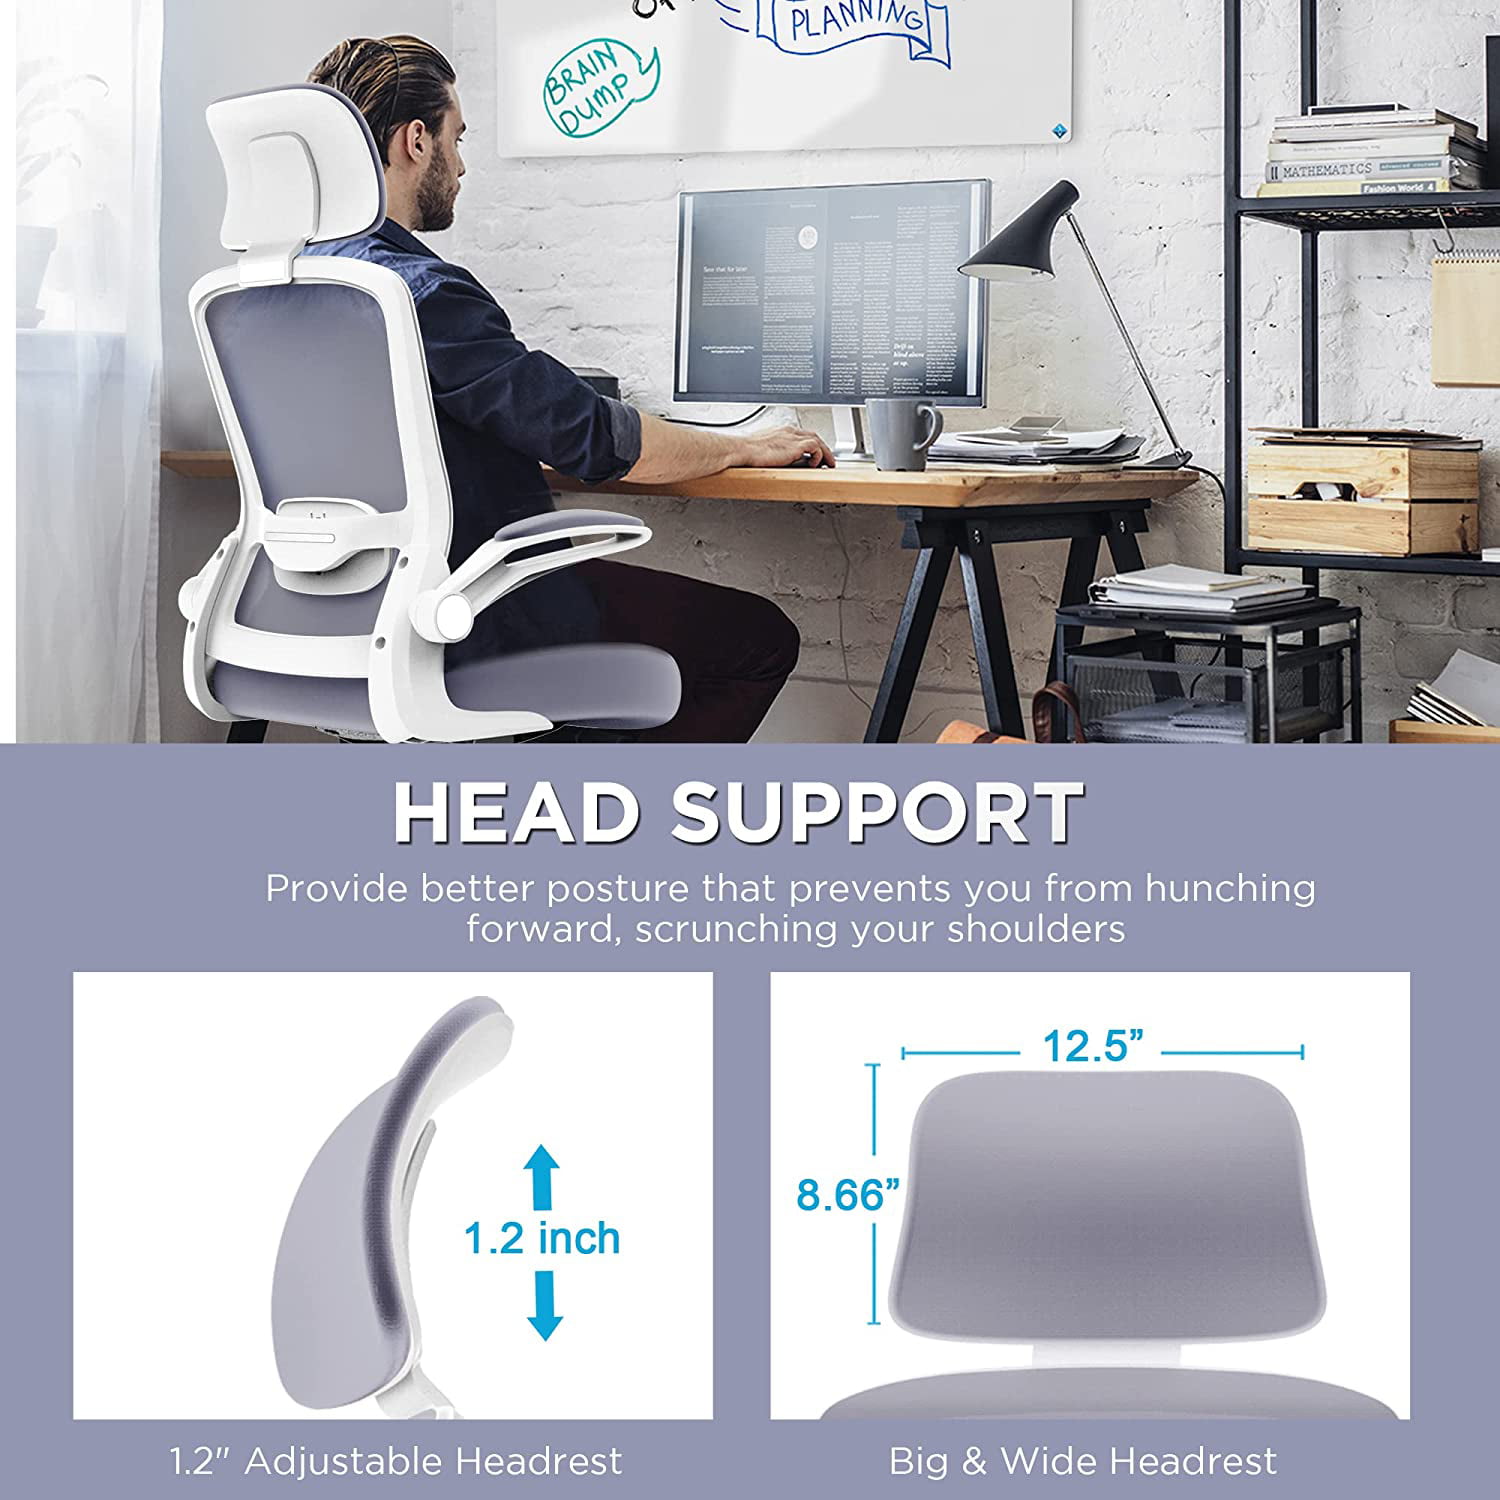 Blarity Office Chair, High Back Ergonomic Desk Chair with Adjustable Lumbar  Support and Headrest 